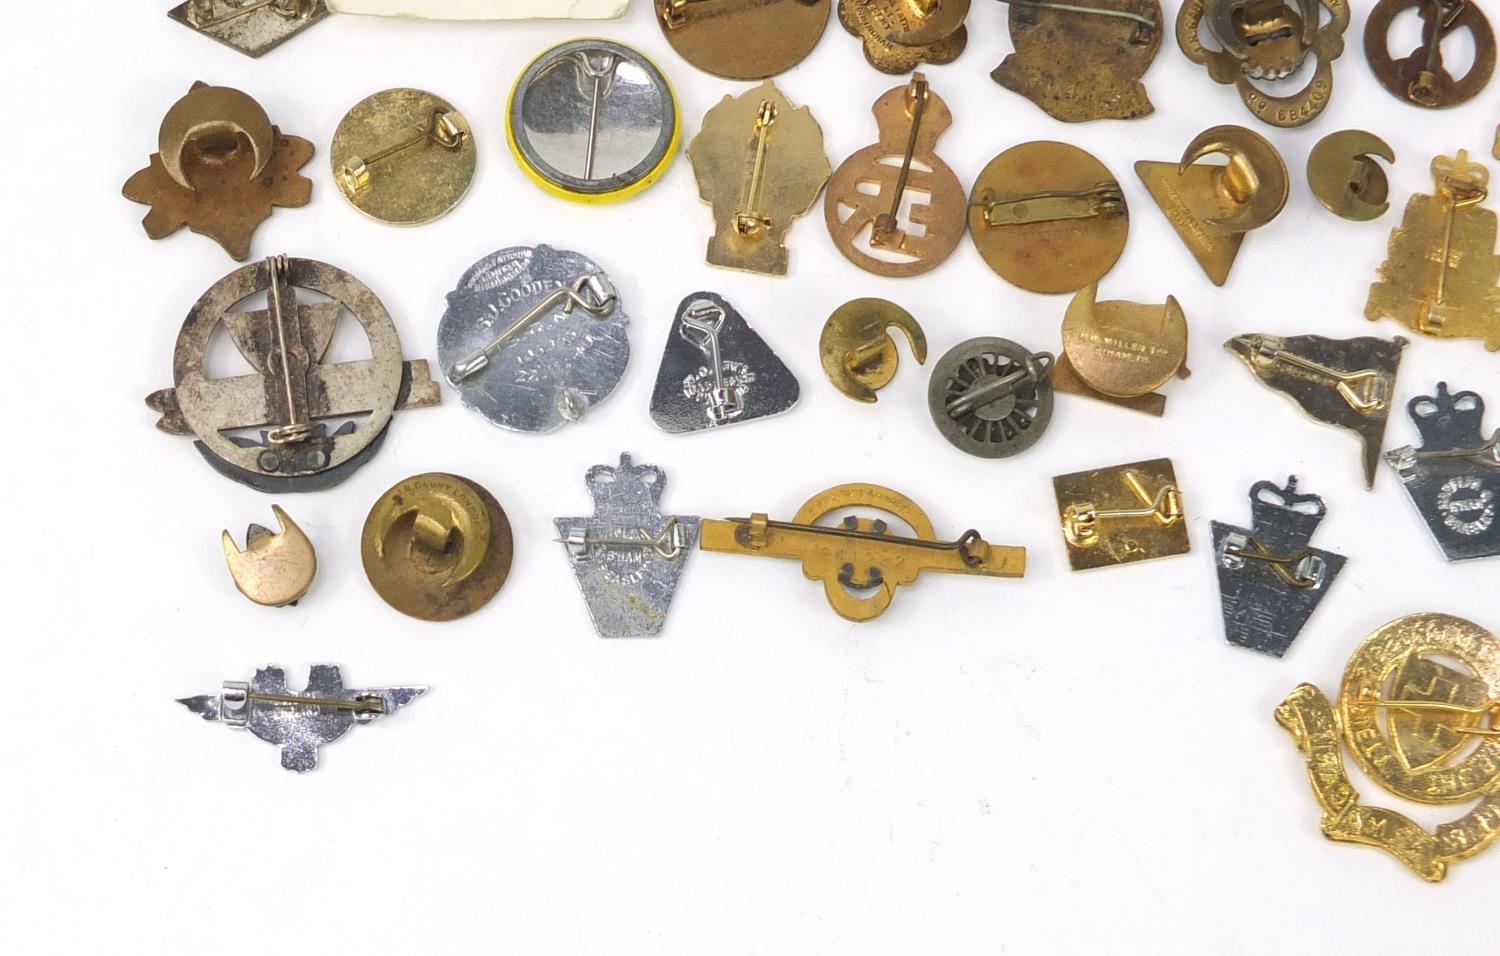 Vintage badges and lapels, some military interest including American World War II sterling silver - Image 9 of 10